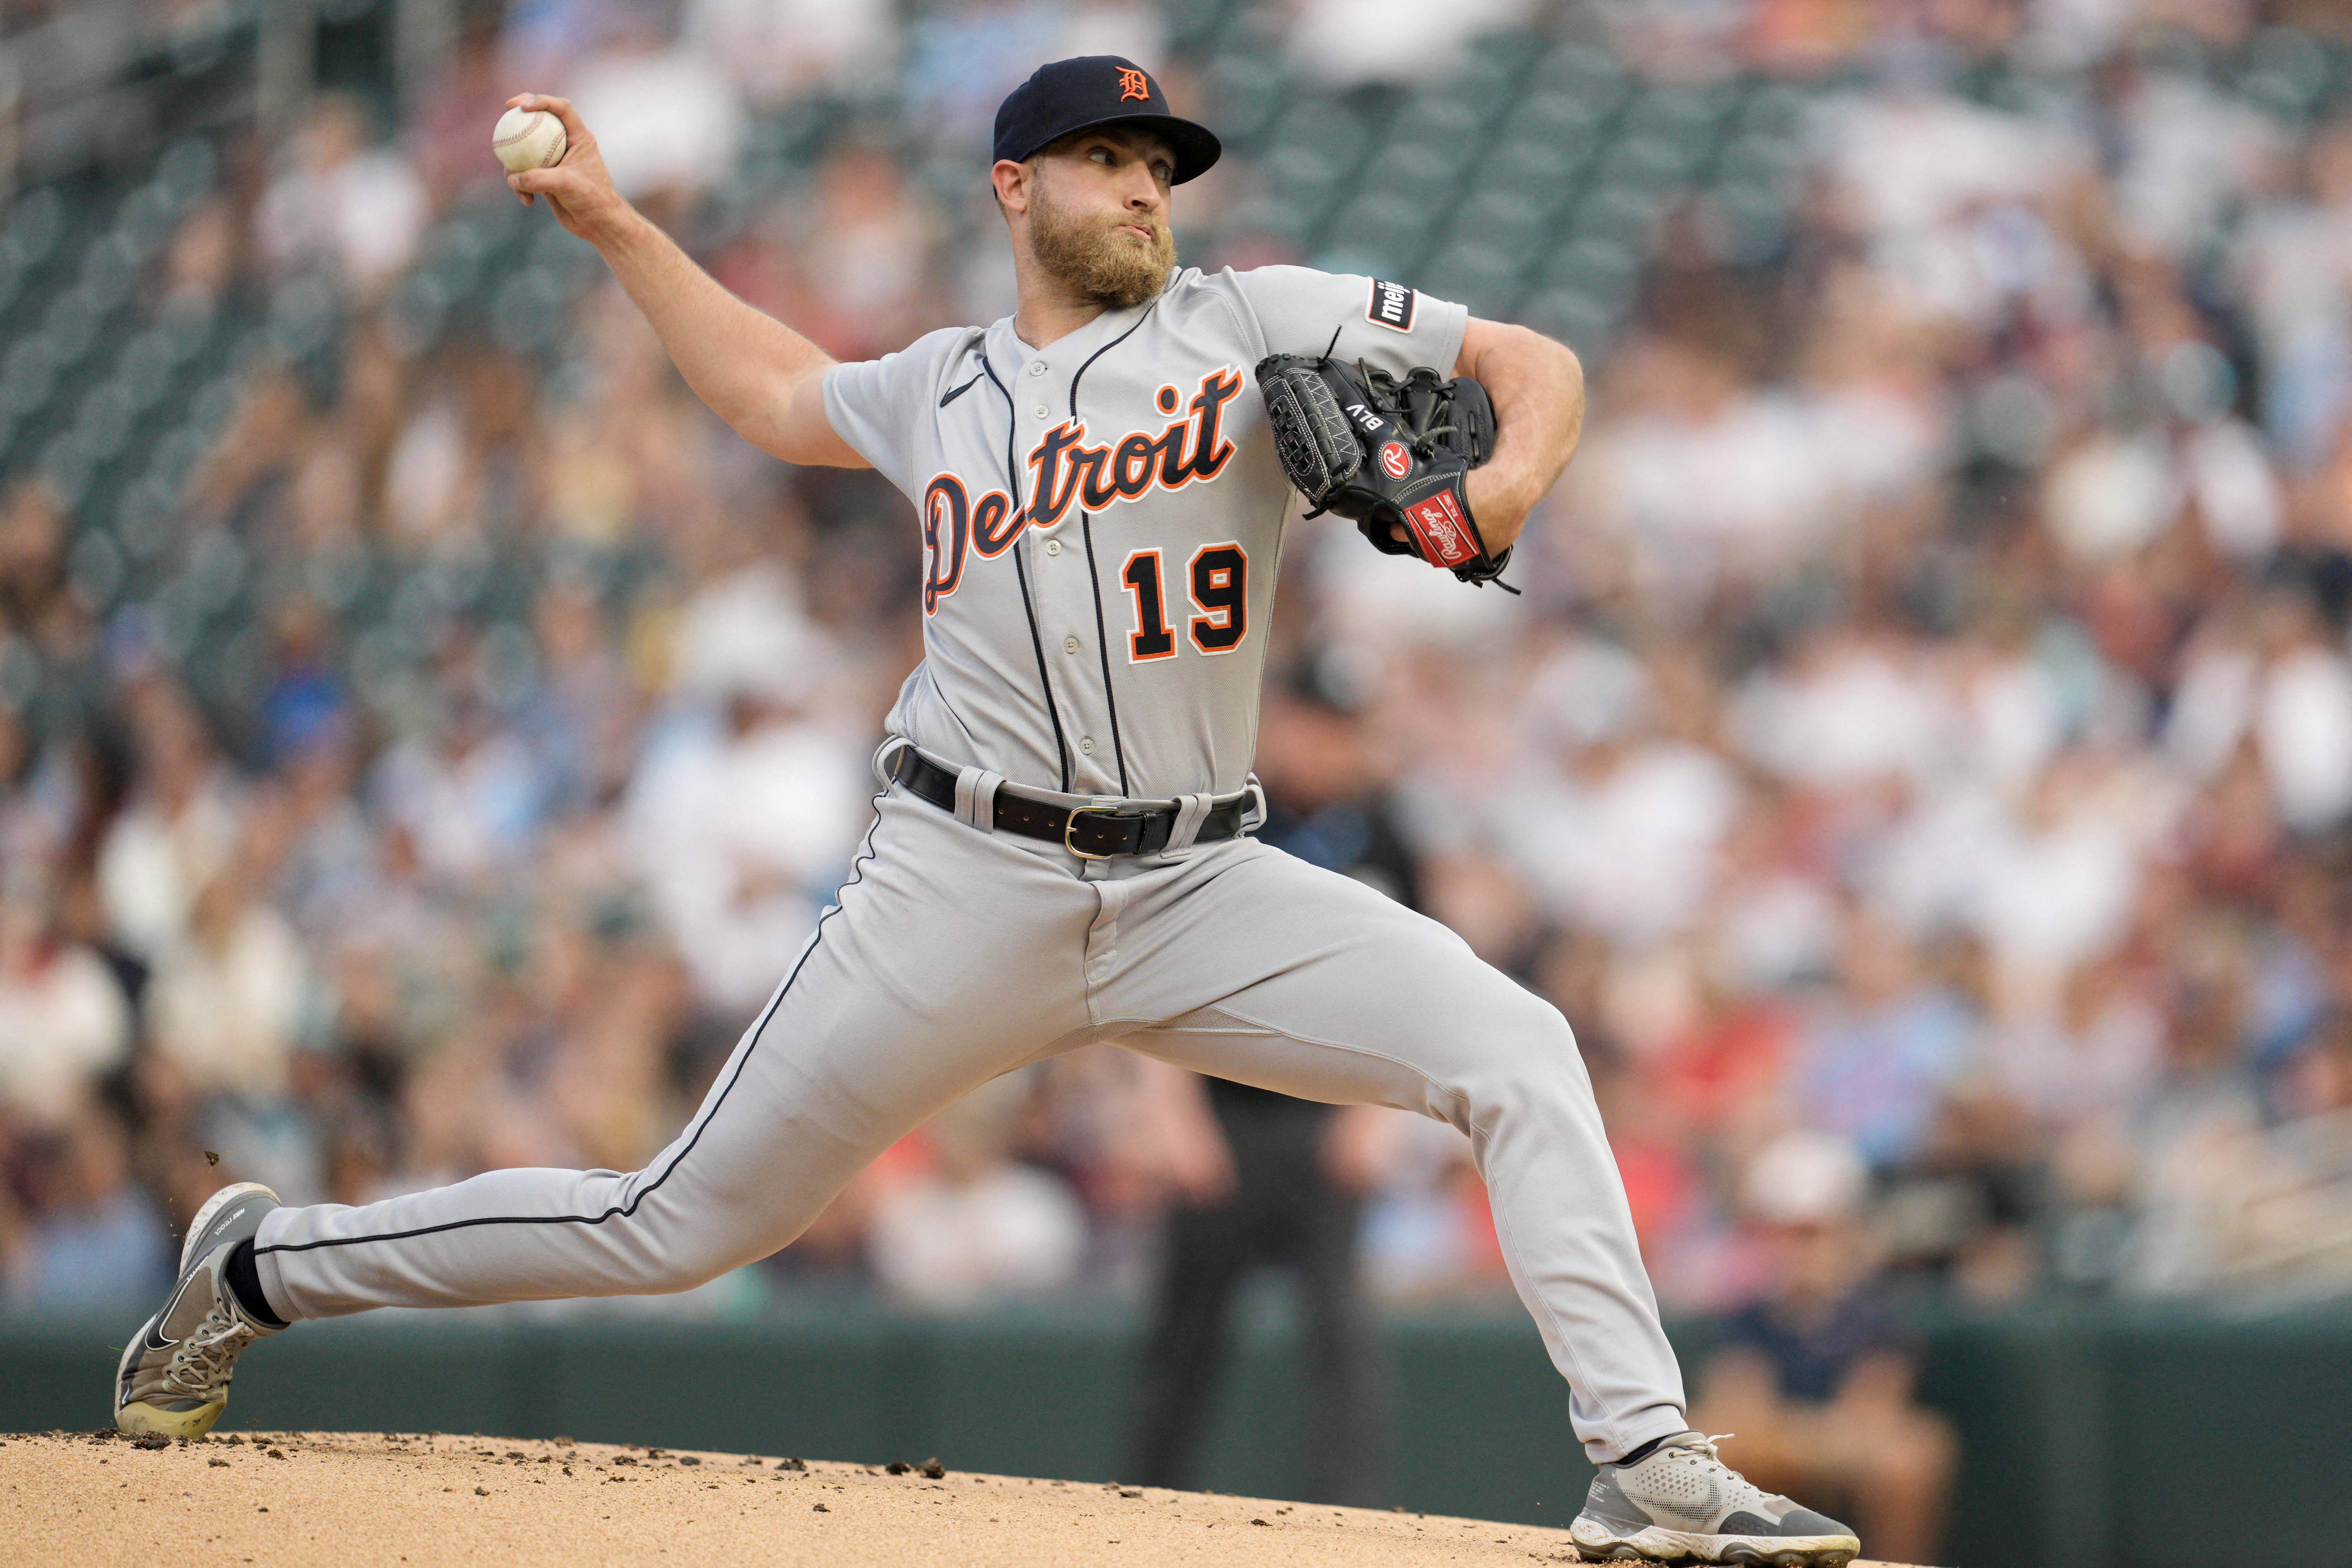 Tigers go deep 3 times in 7-1 blowout win over Twins